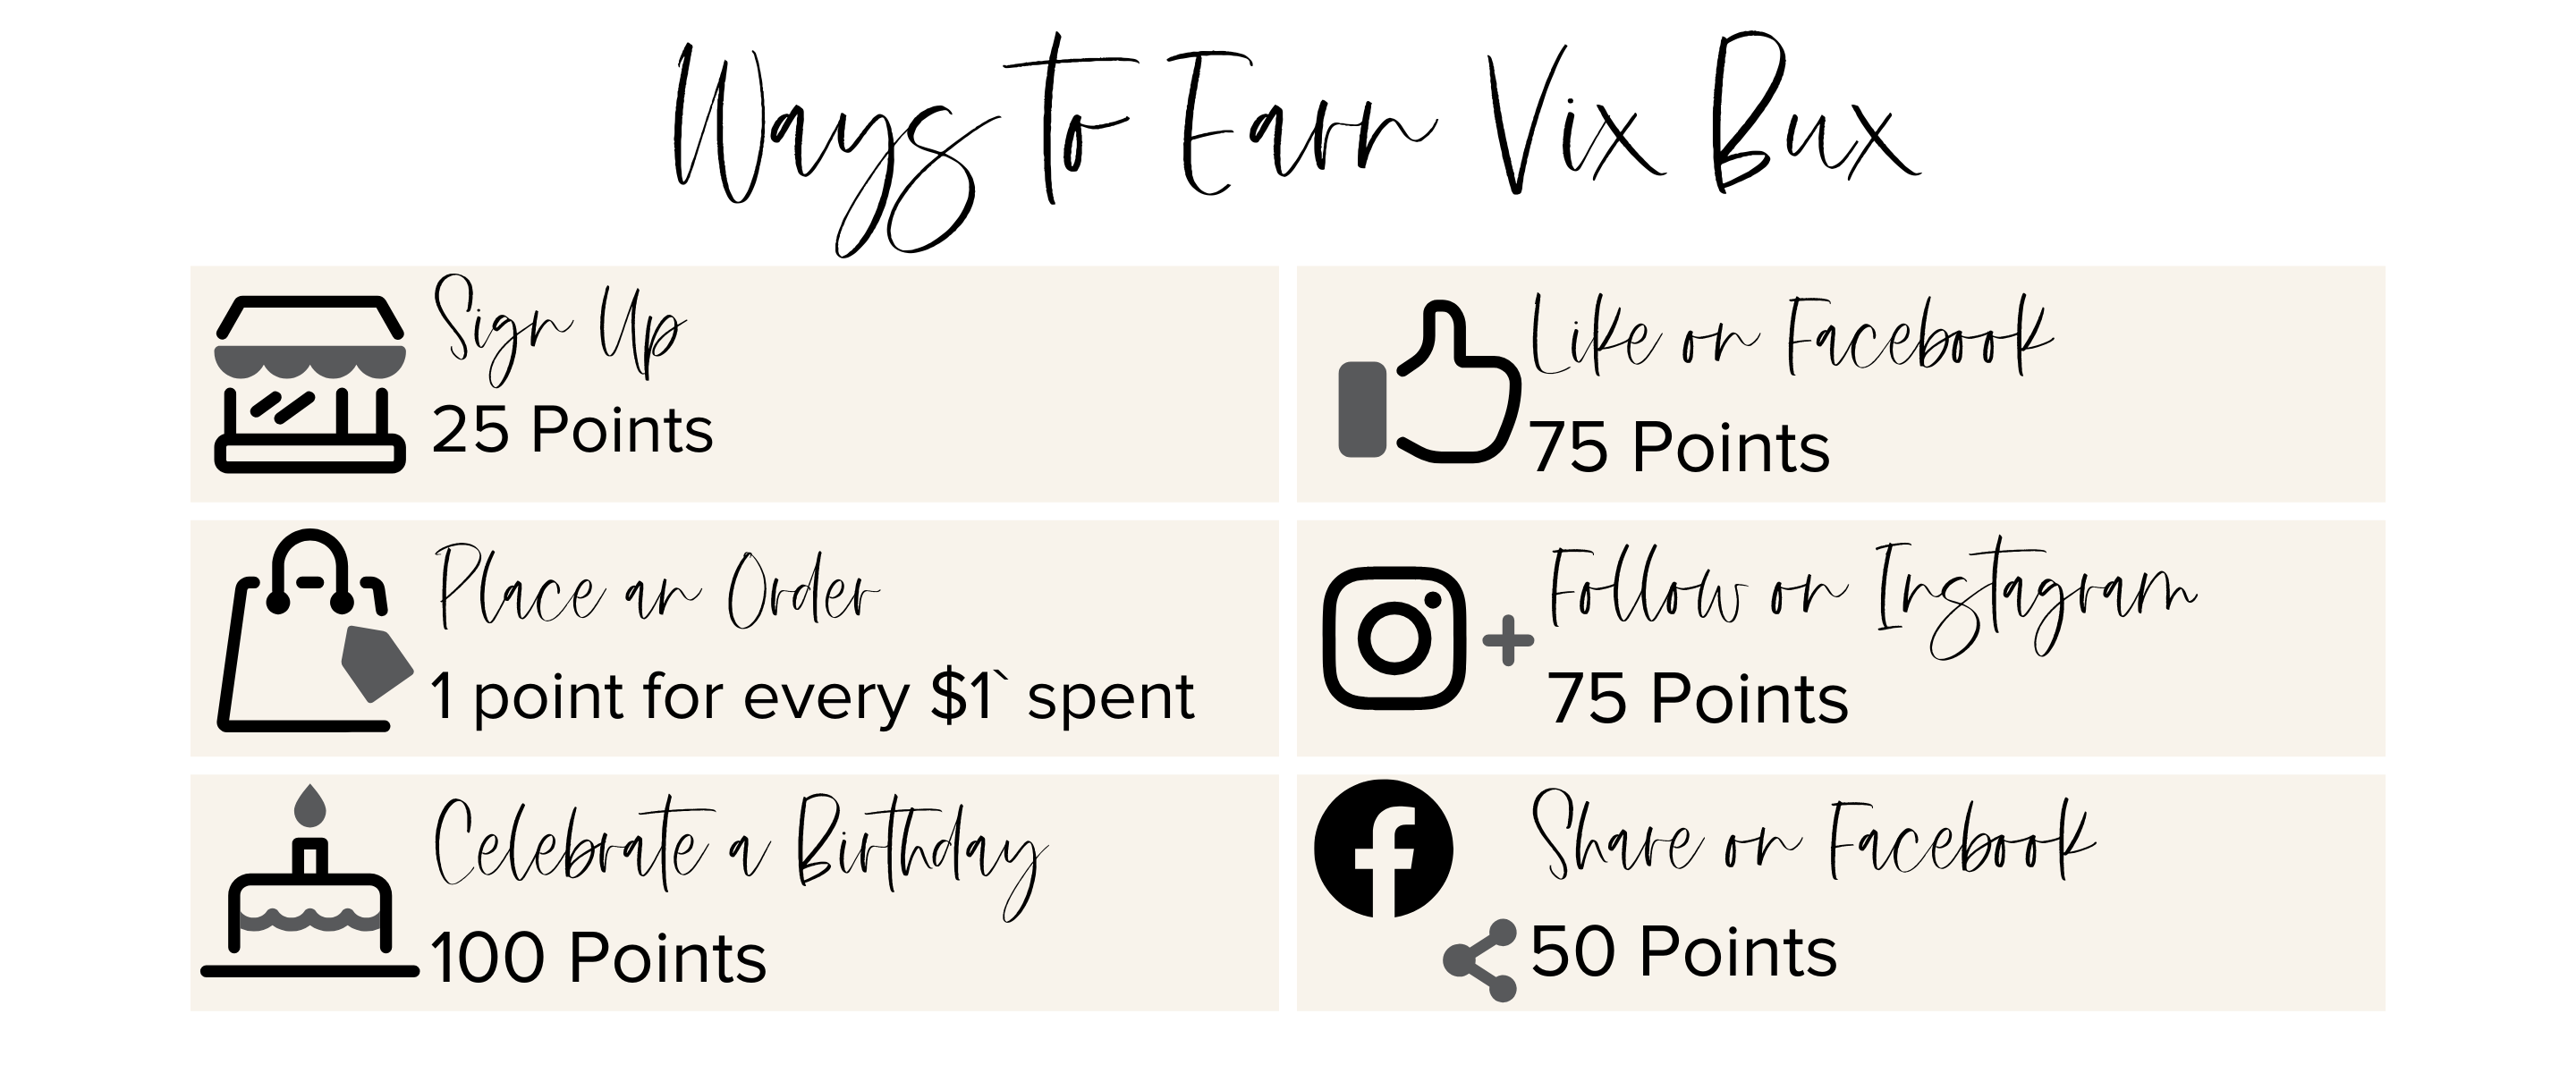 Ways to earn vix bux. Sign up, 25 points. Place an order 1 point for every $1 spent. Celebrate a birthday 100 points. Like on fakebook 75 points.  Follow on Instagram 75 points.  share on Facebook 50 points. 